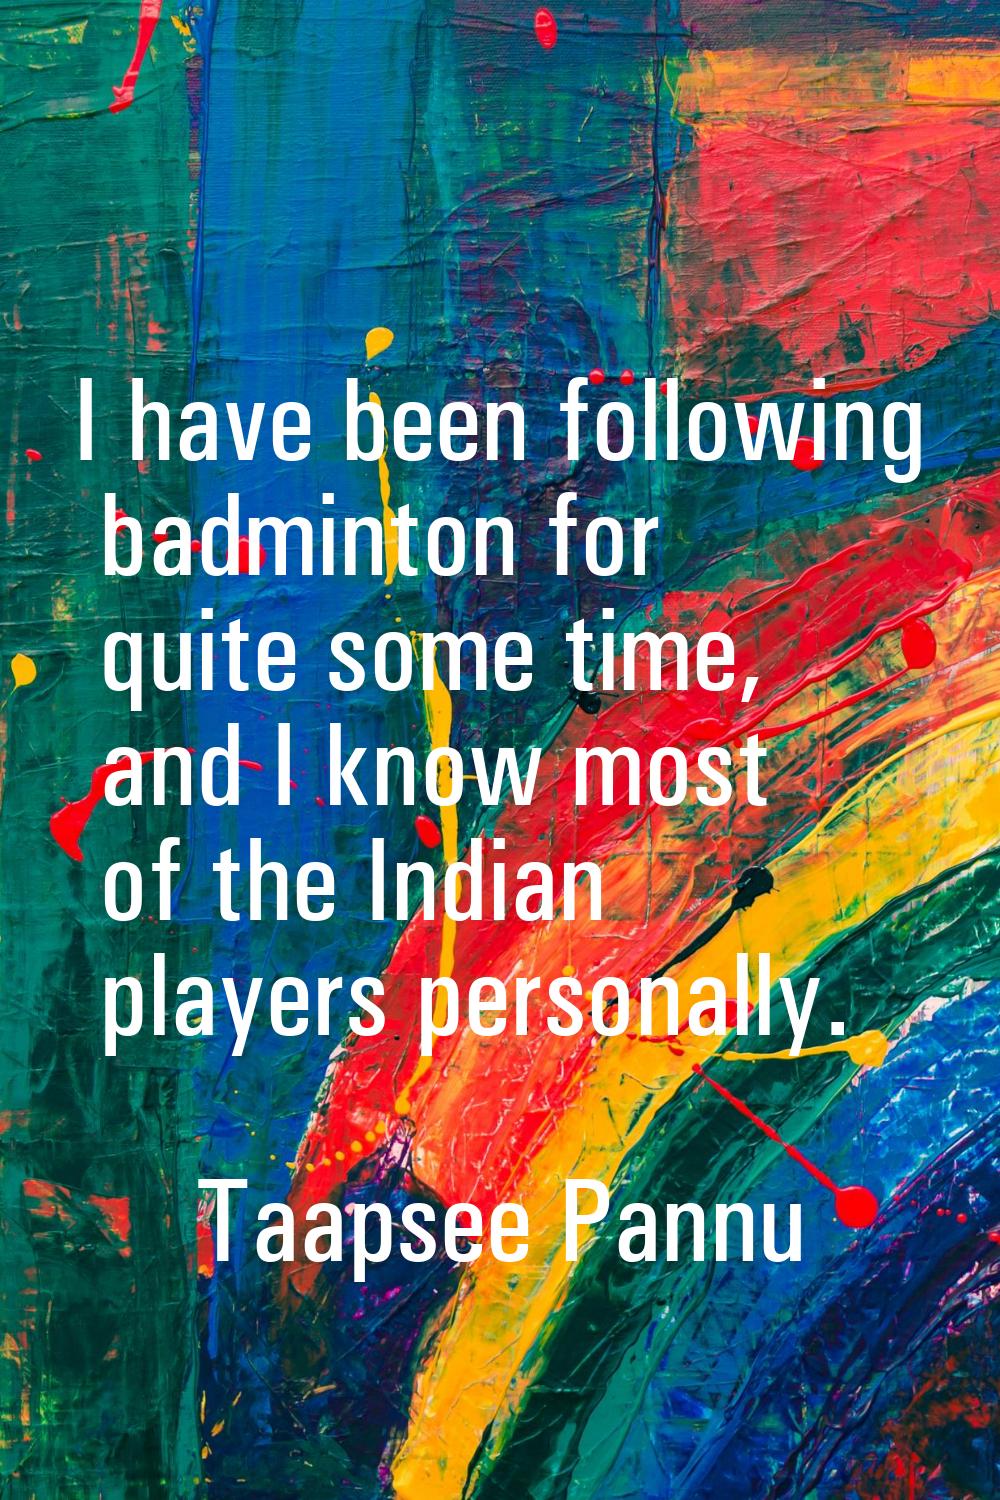 I have been following badminton for quite some time, and I know most of the Indian players personal